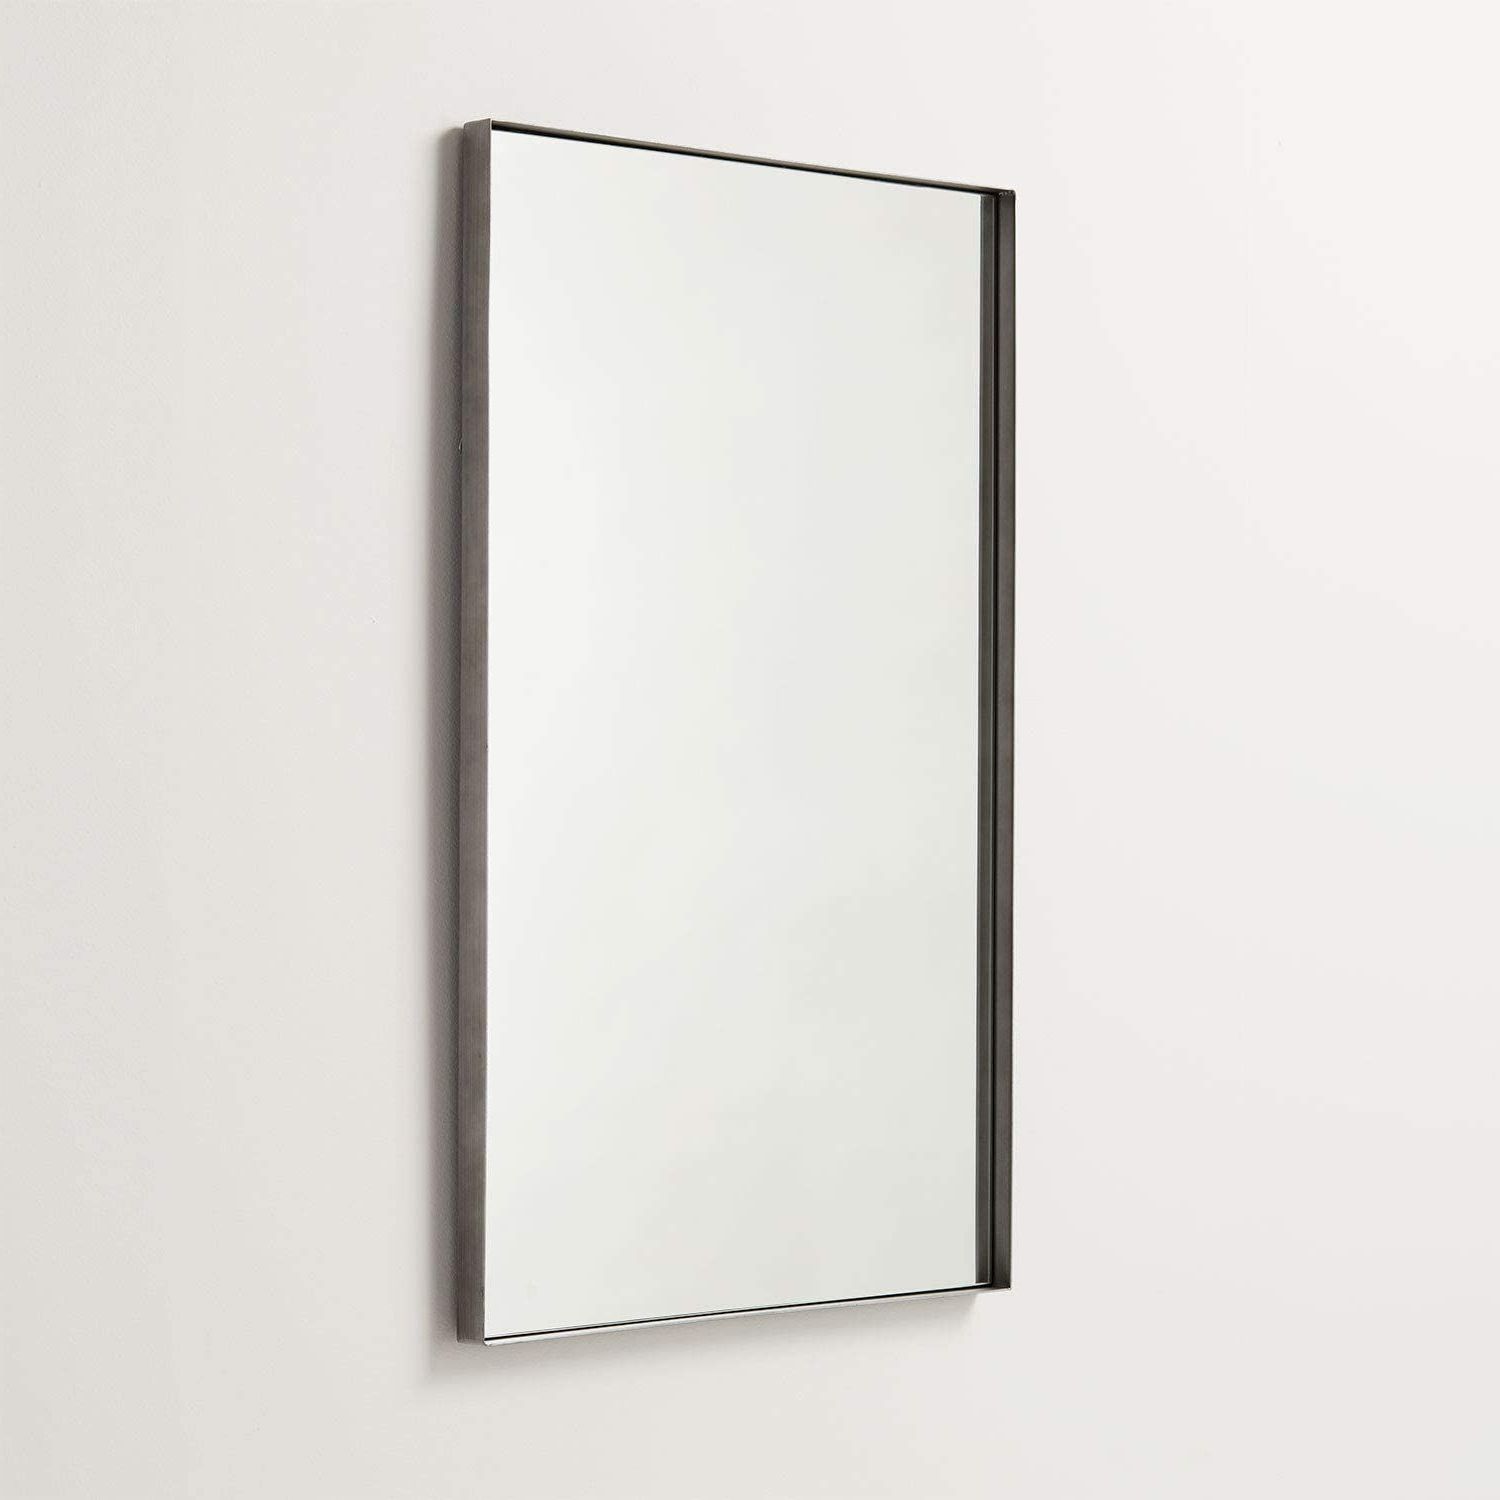 Amazonsmile: Better Bevel 30" X 40" Brushed Silver Metal Framed Throughout Most Recent Metallic Silver Wall Mirrors (View 5 of 15)